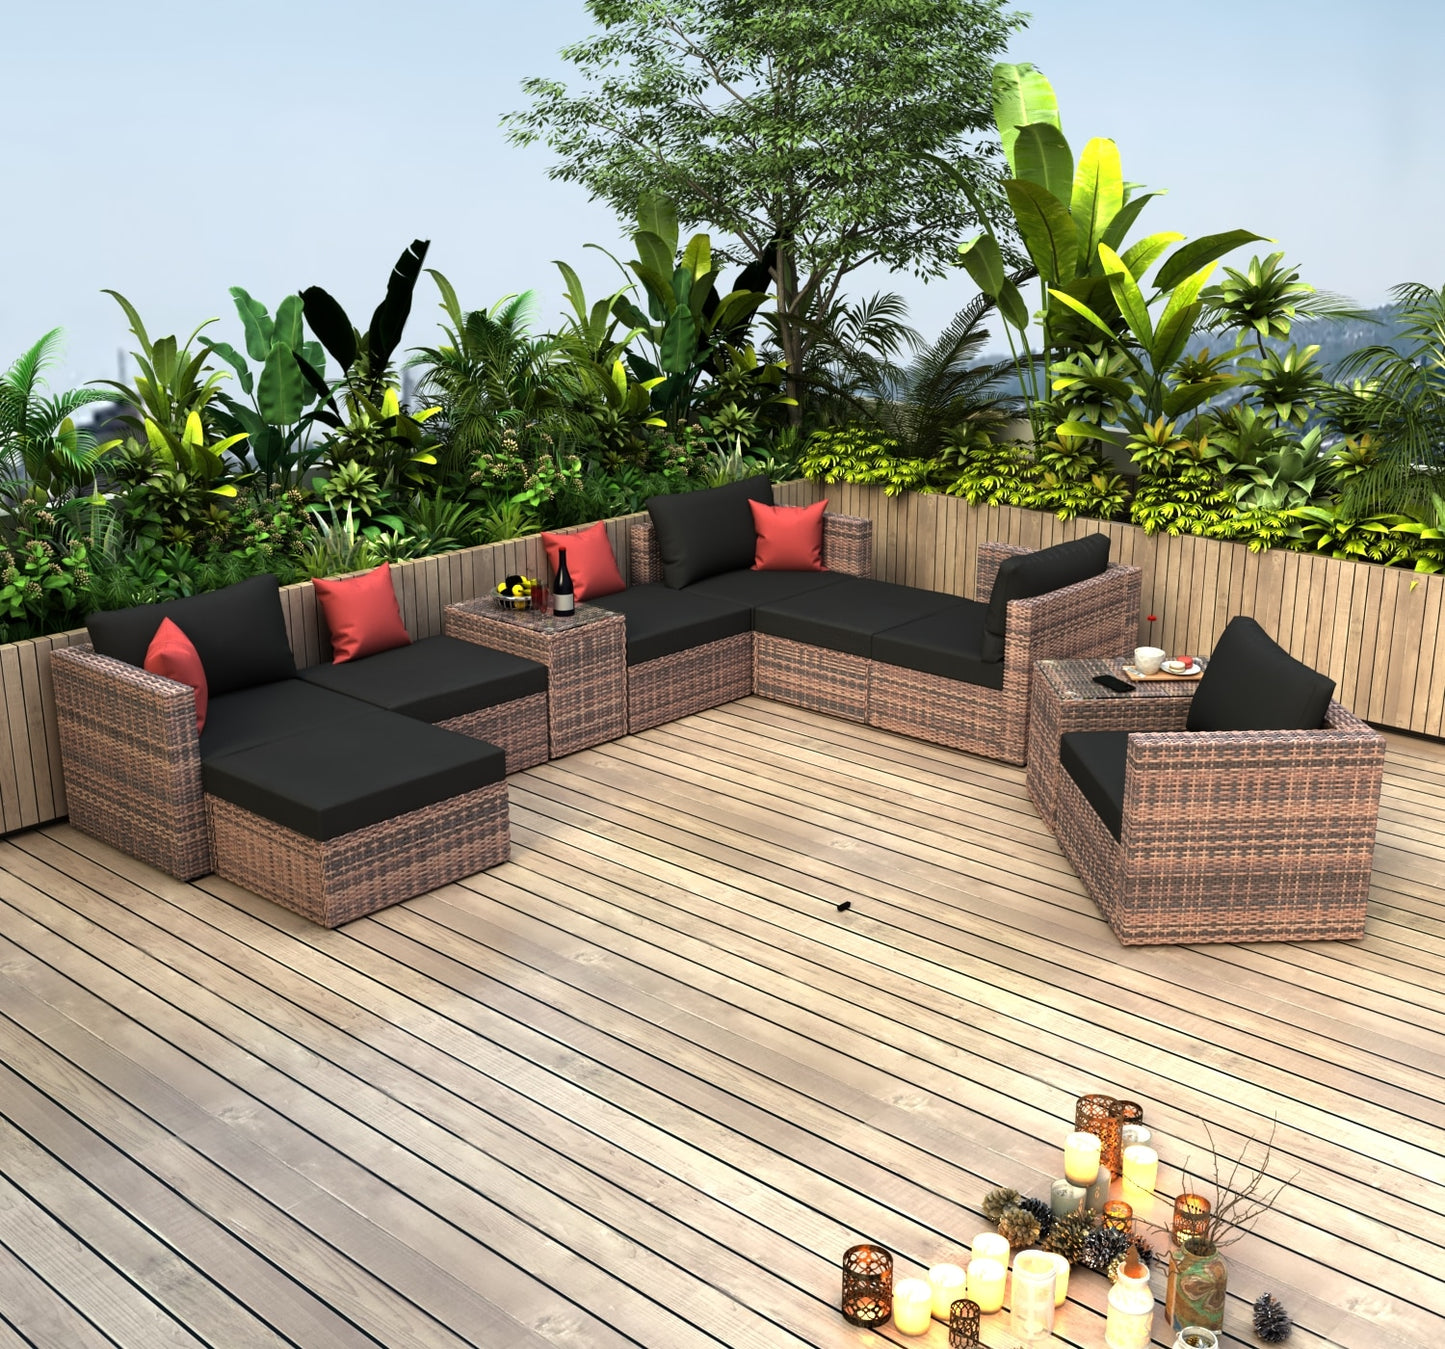 Outdoor Patio Garden chair Brown Wicker Sectional Conversation Sofa Set imitation bamboo rattan with Cushions Pillows Cover - youronestopstore23